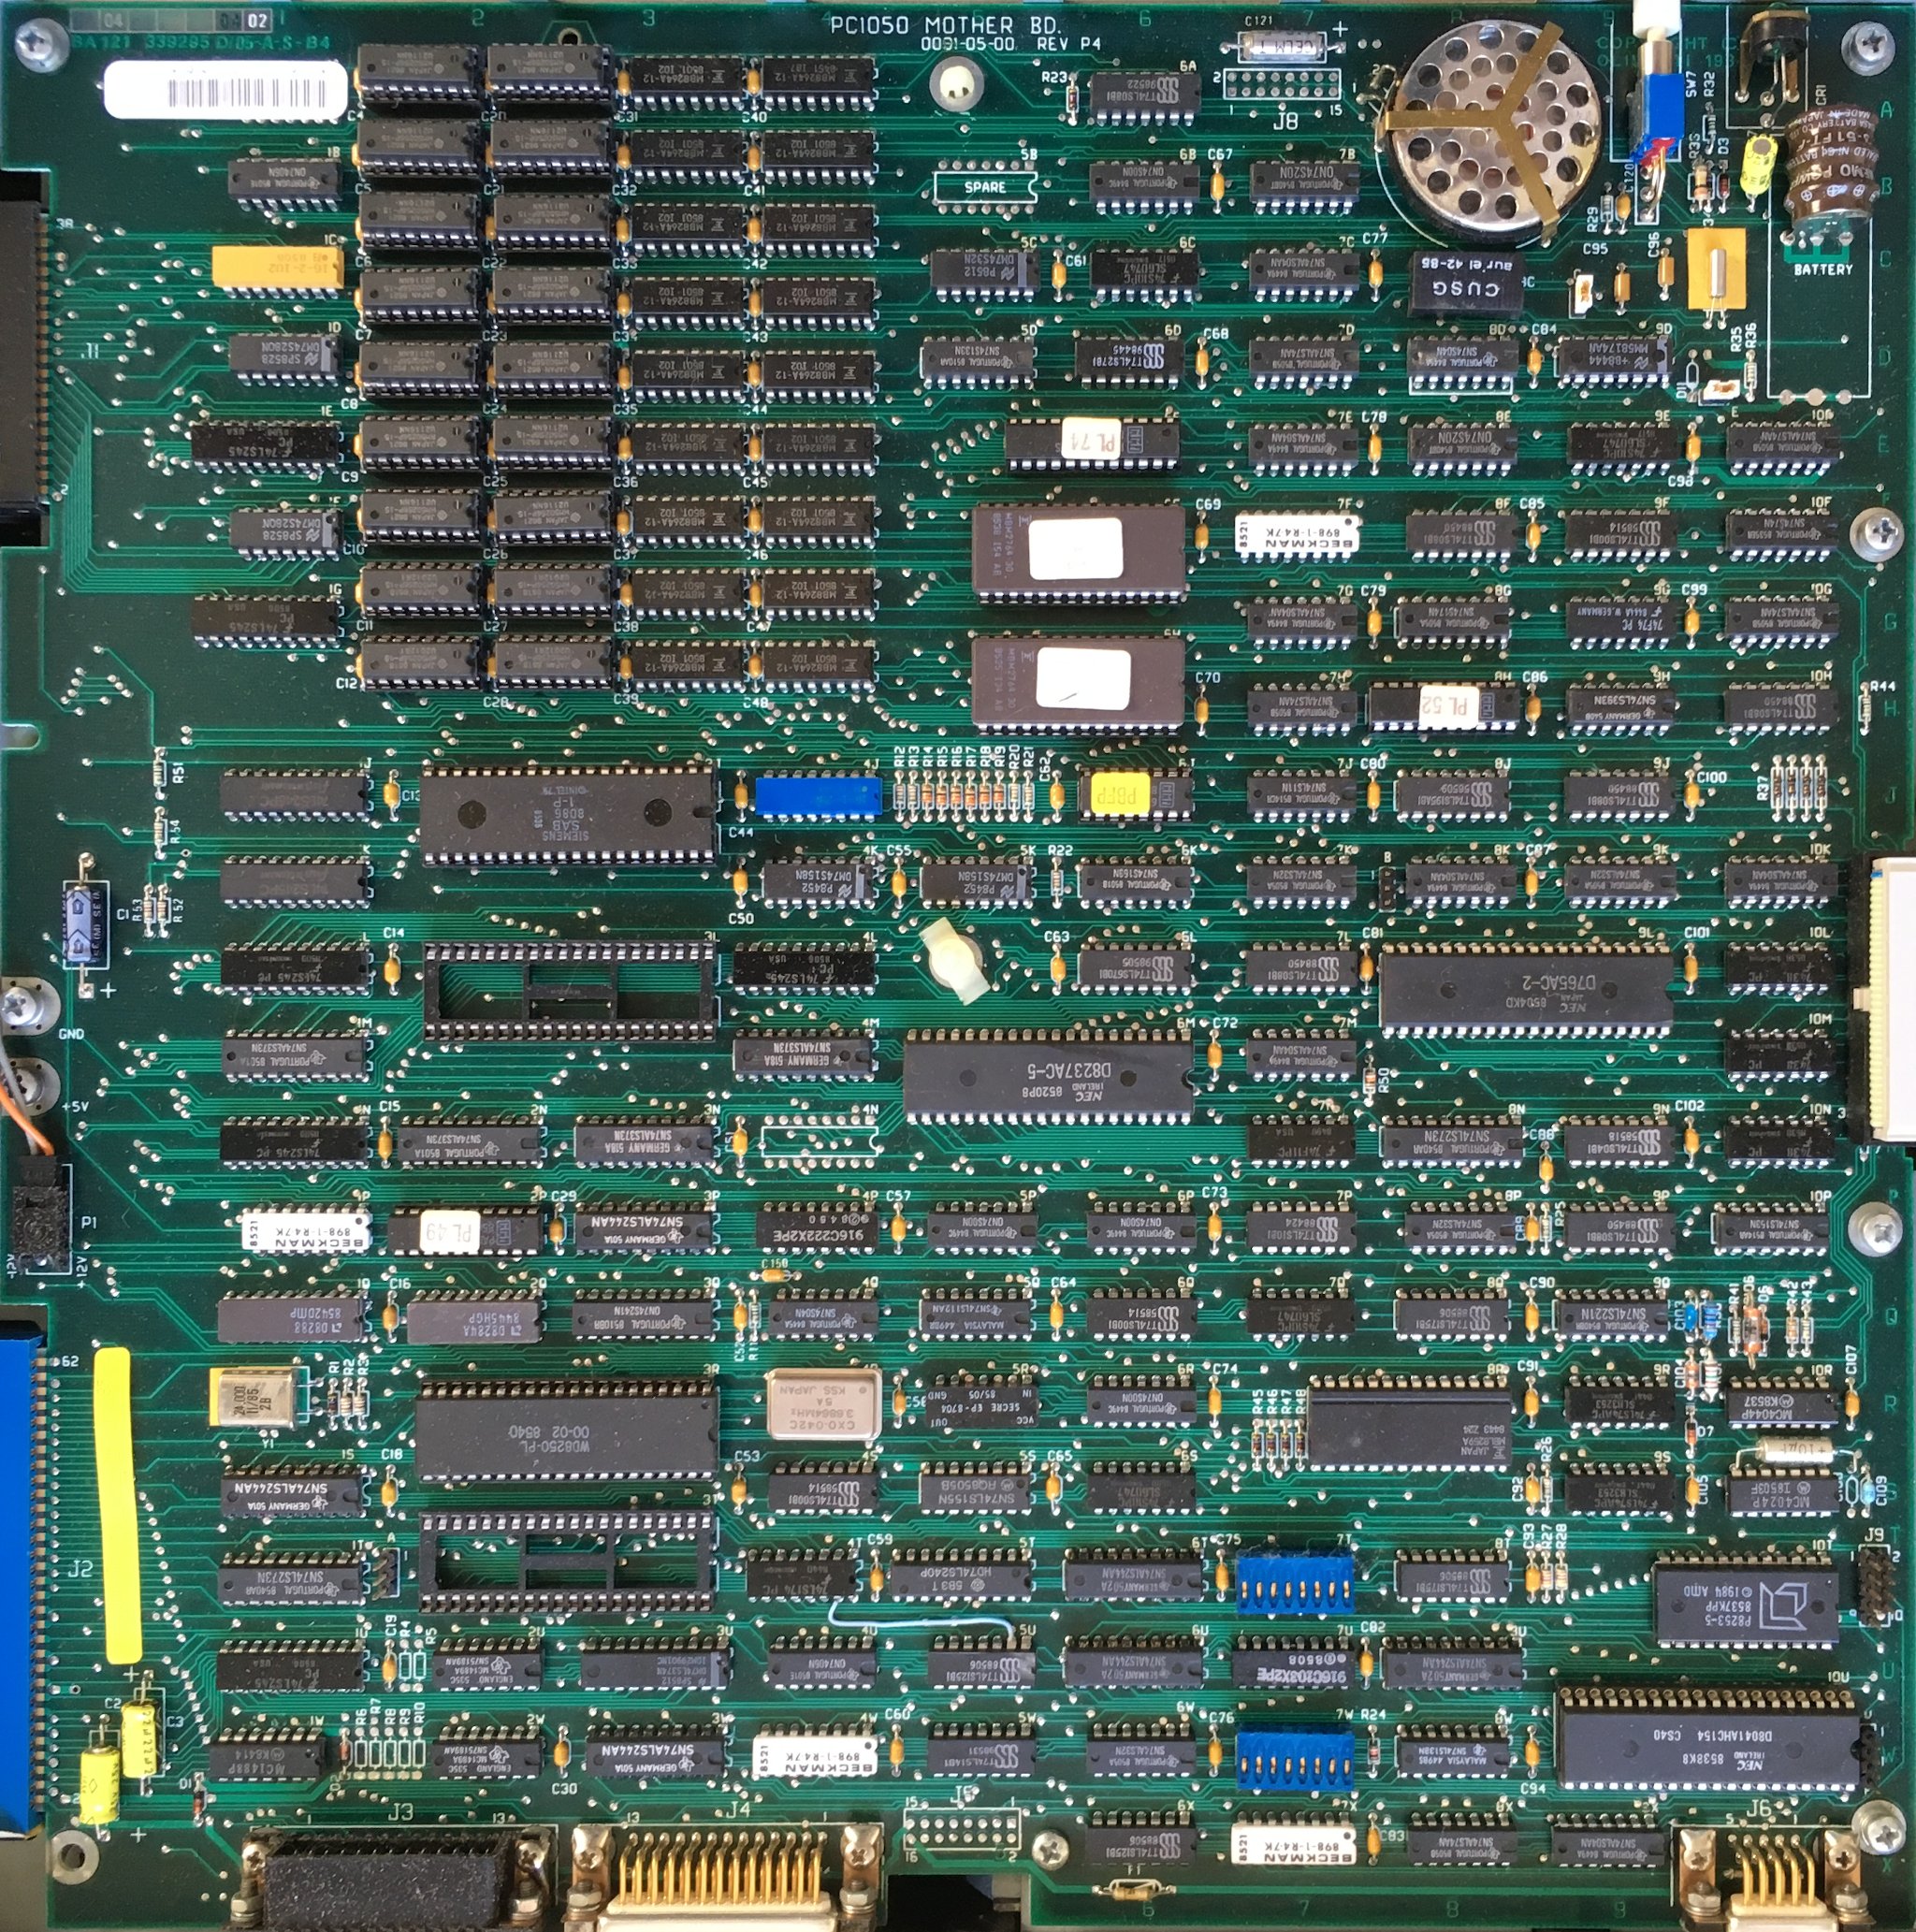 AT&T 6300 motherboard